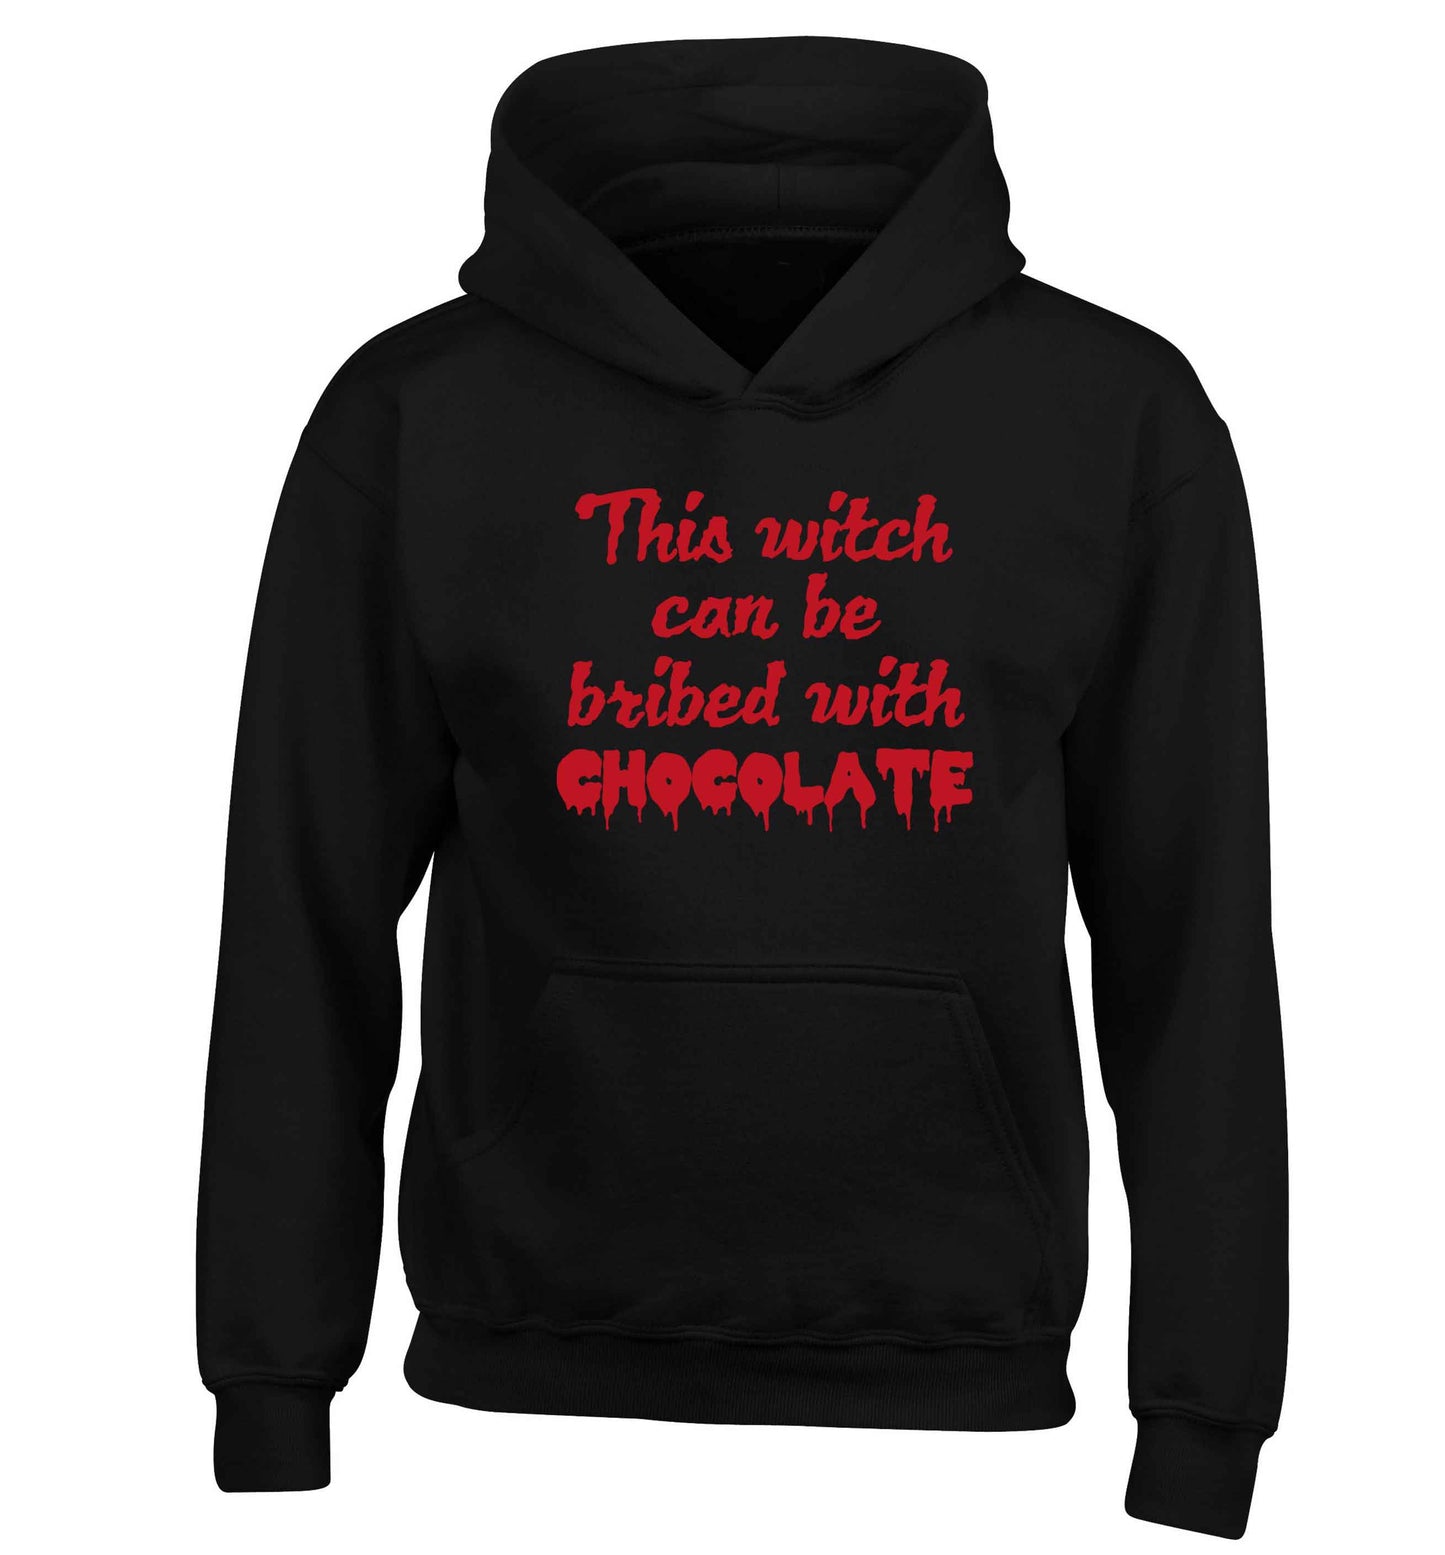 This witch can be bribed with chocolate children's black hoodie 12-13 Years